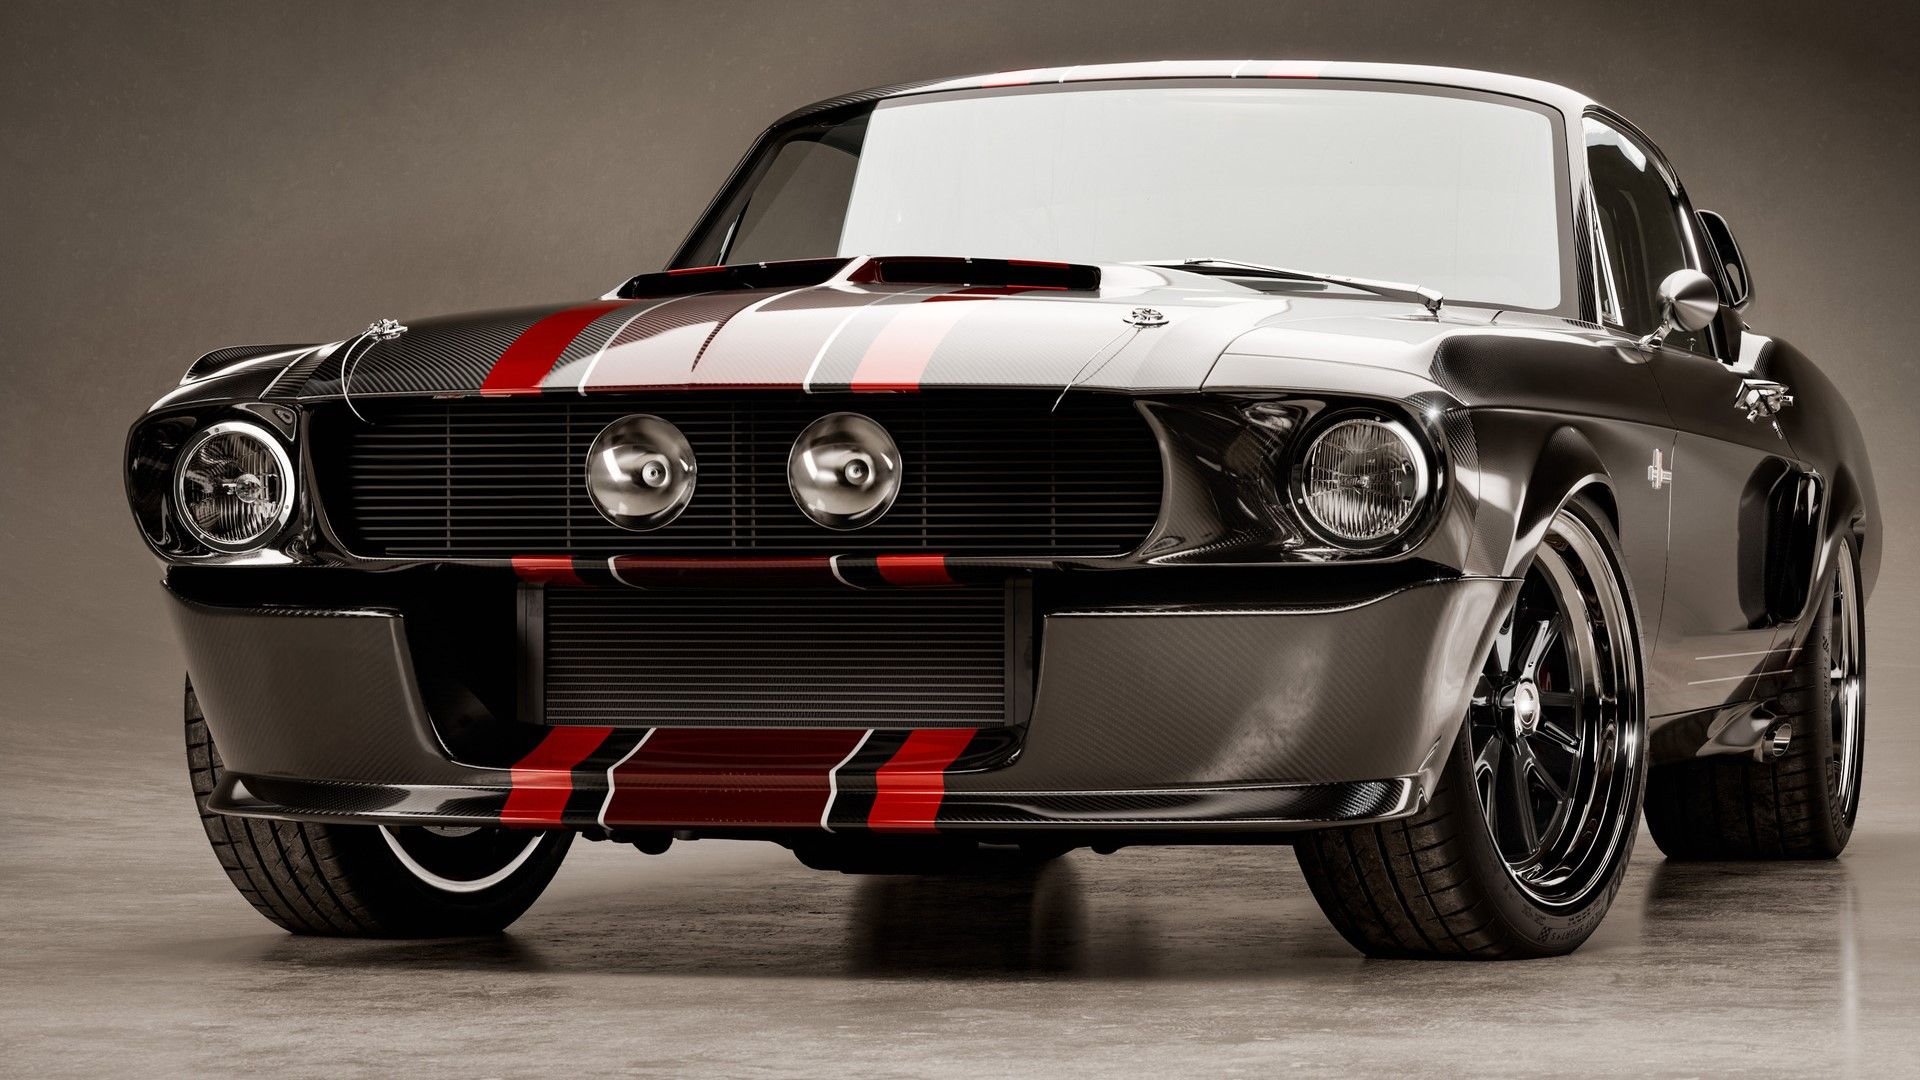 EXCLUSIVE Classic Recreations On What Separates Their Shelby GT500